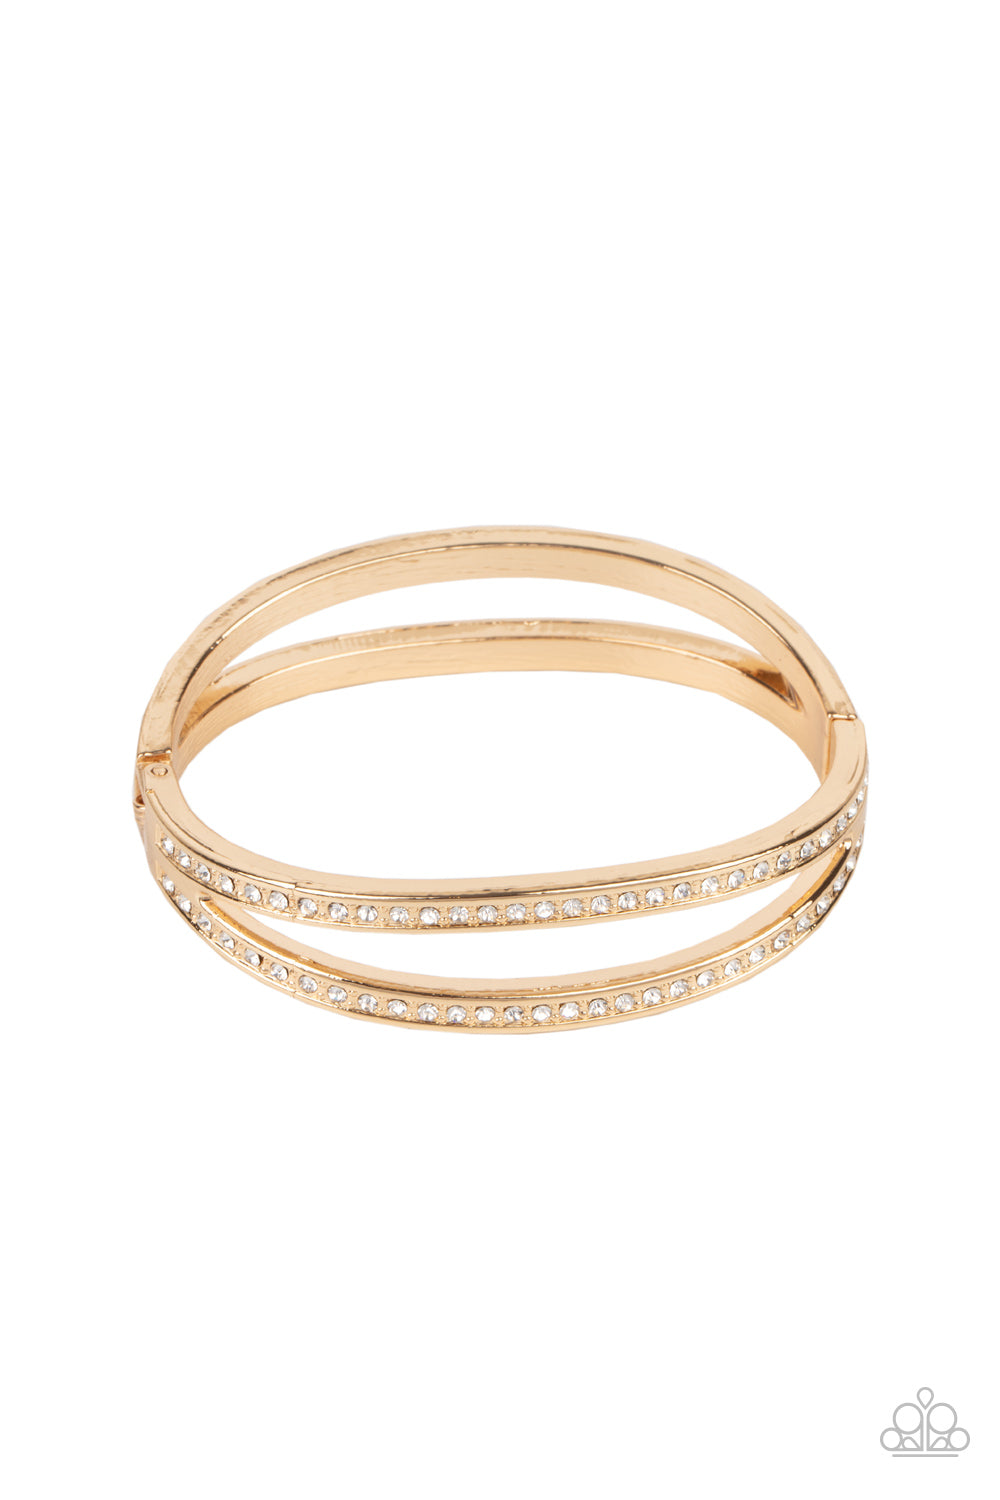 A Show of FIERCE Bracelet in Gold. #P9RE-GDXX-303XX. Hinged Closure. Get Free Shipping.